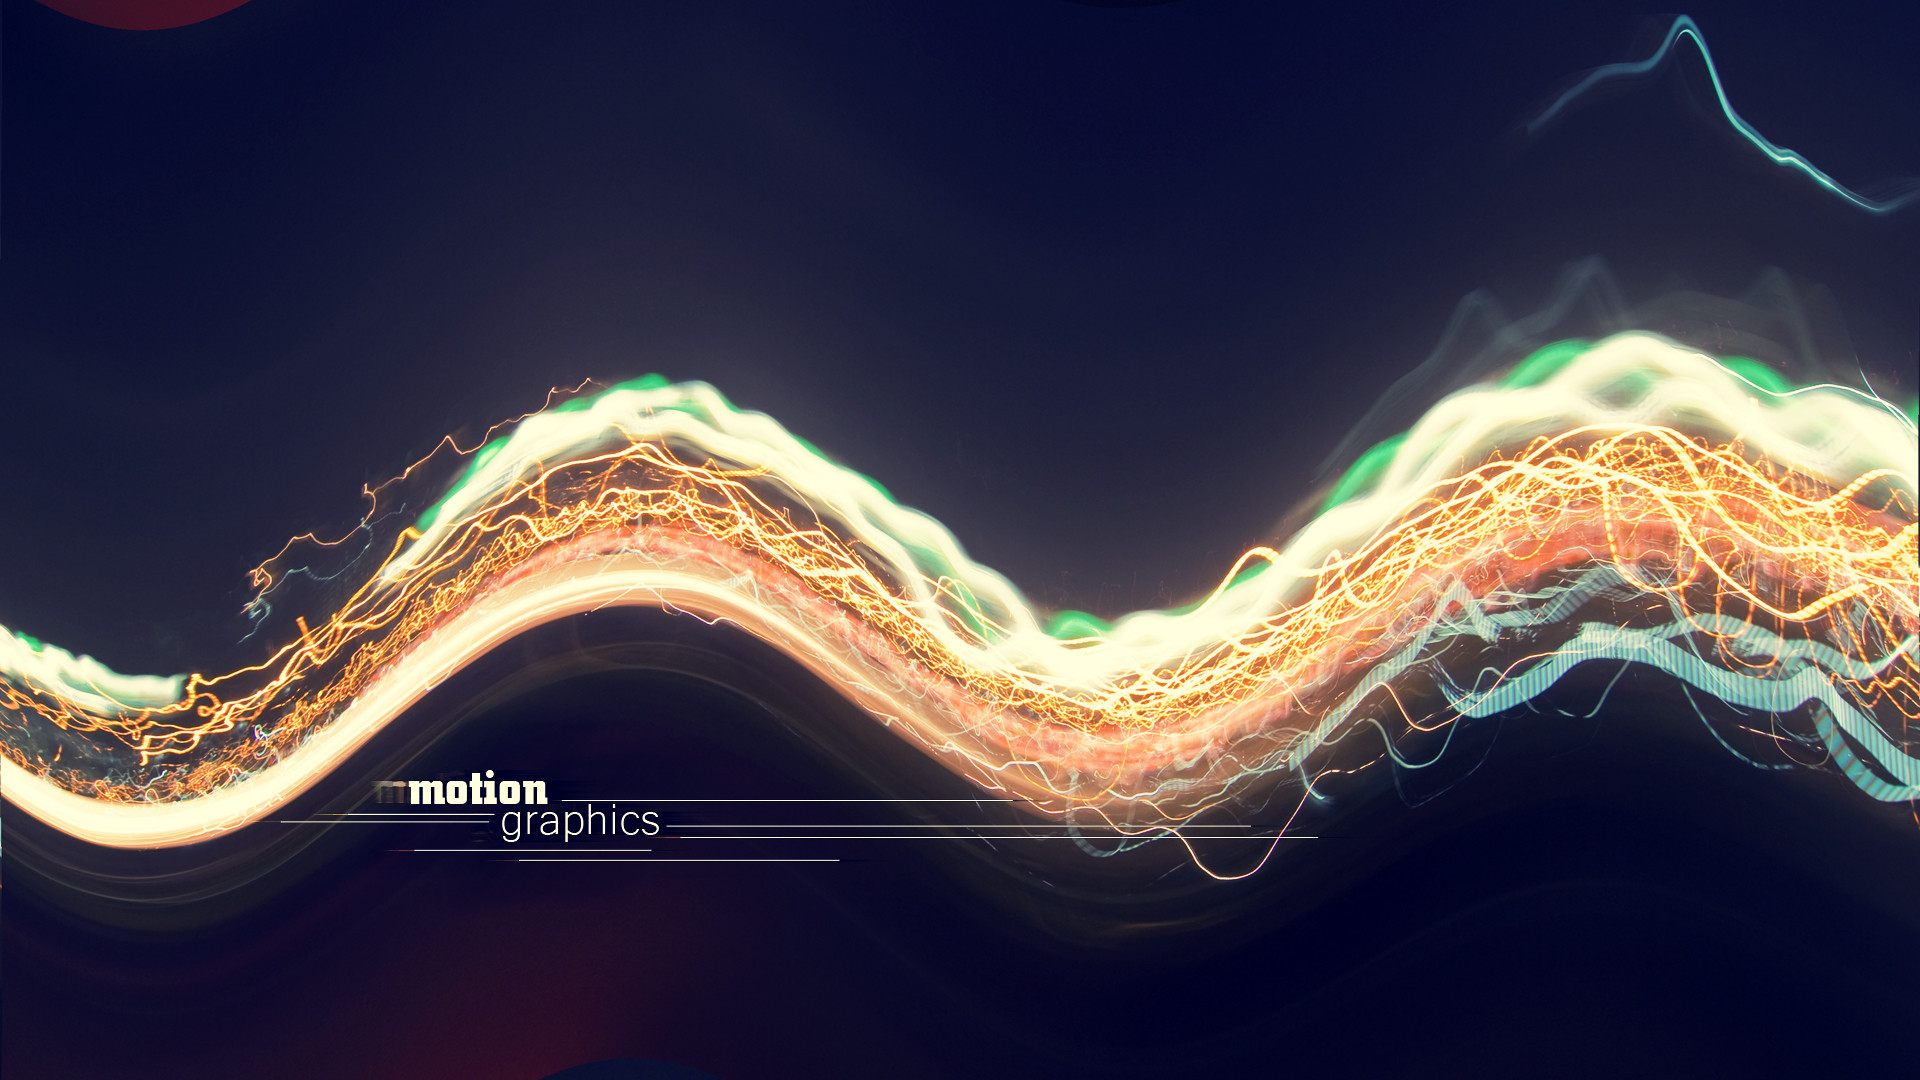 motion wallpapers for android,light,sky,line,technology,wave